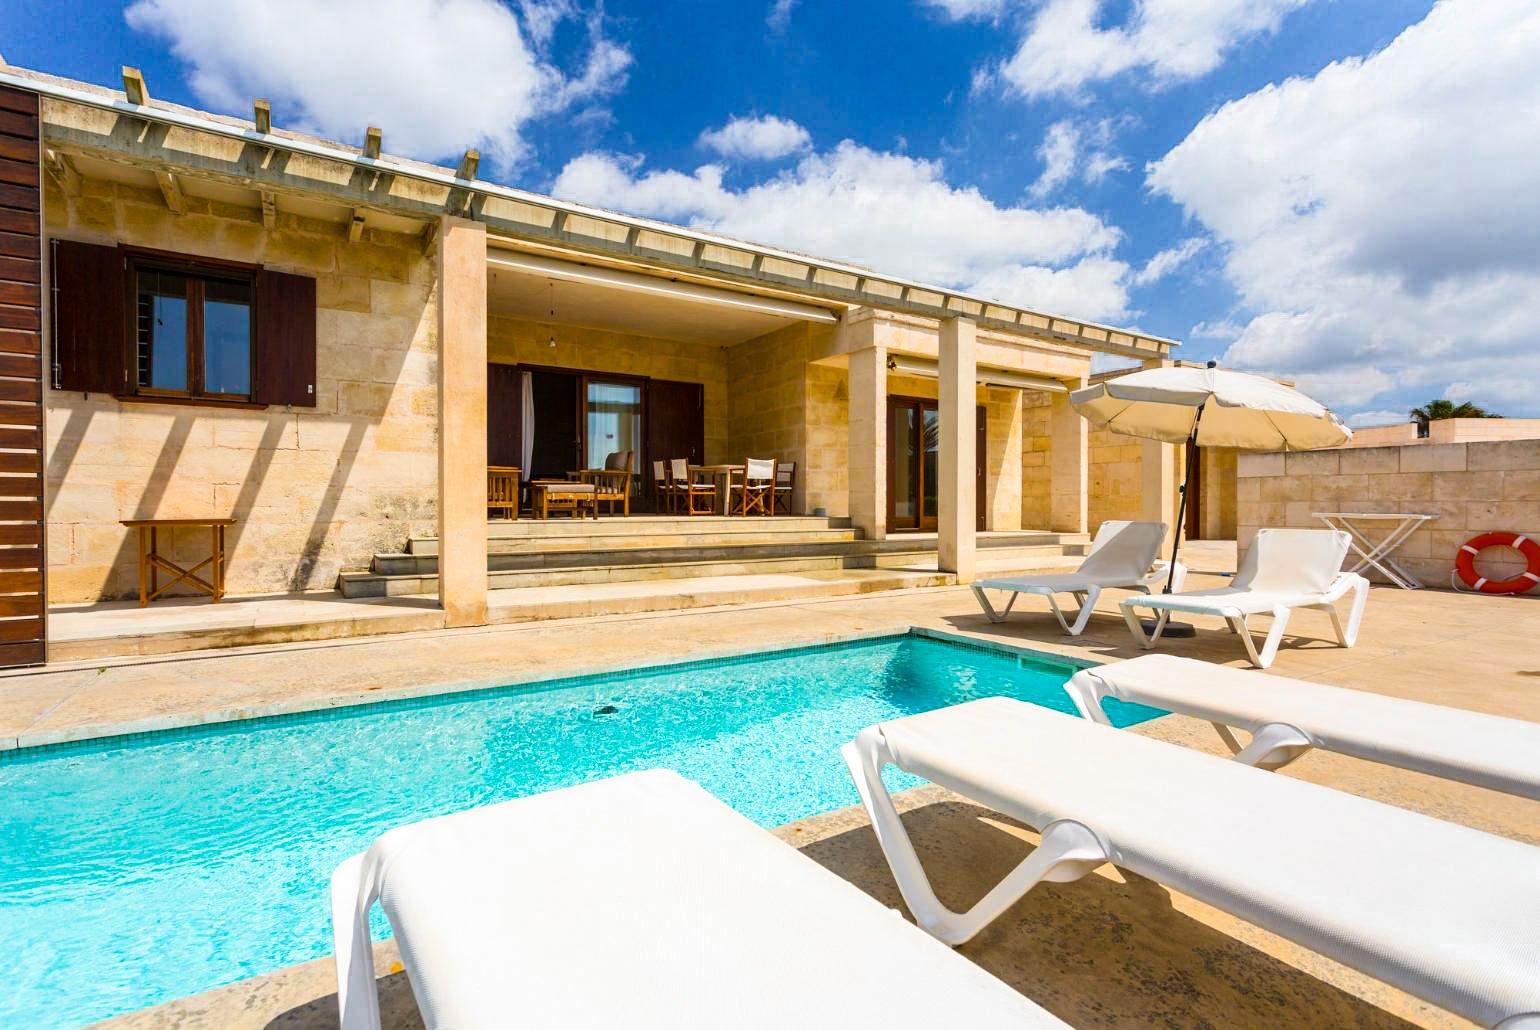 Beautiful villa with private pool, partially sheltered terrace, and sea views